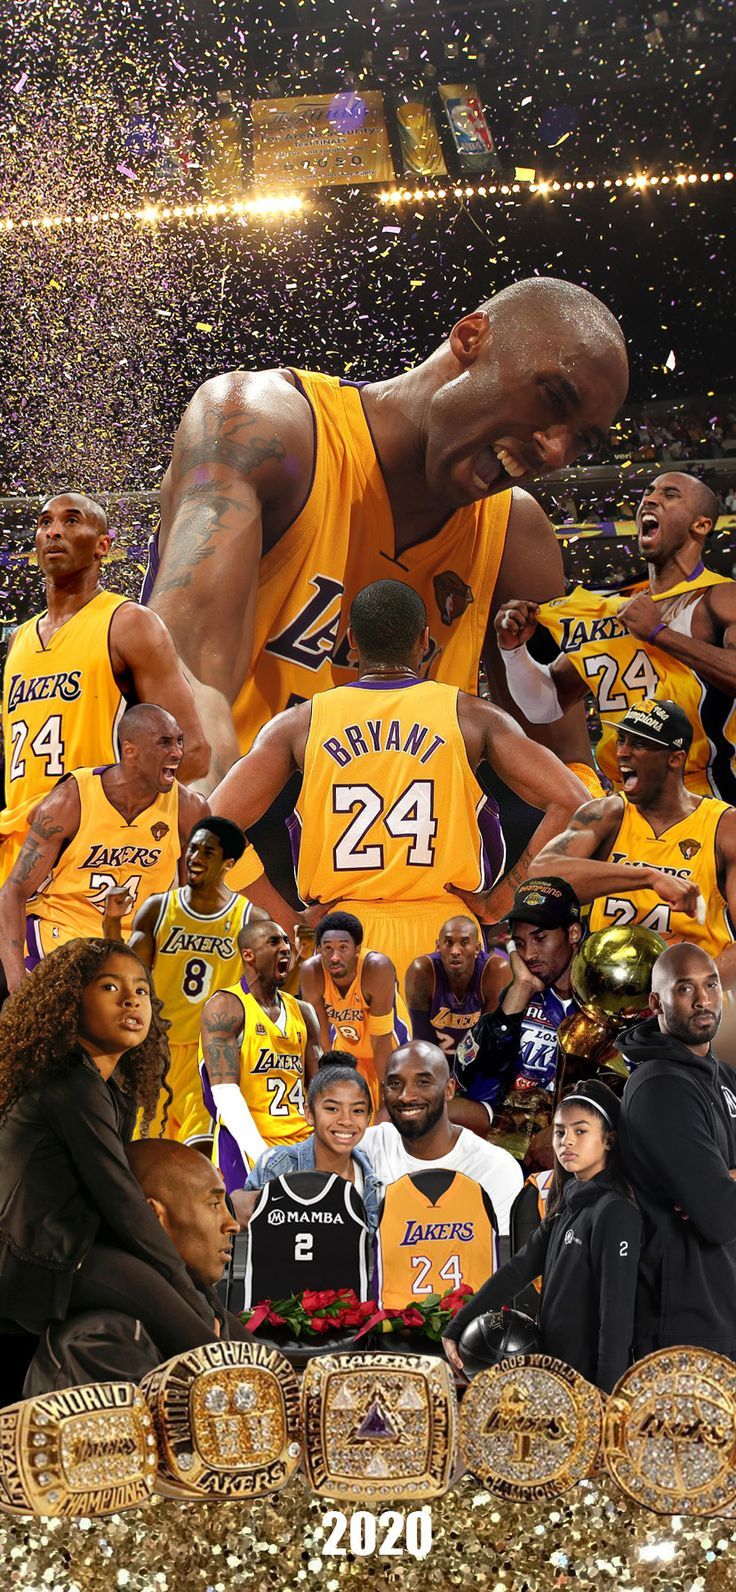 Rest In Peace Kobe And Gigi Wallpapers